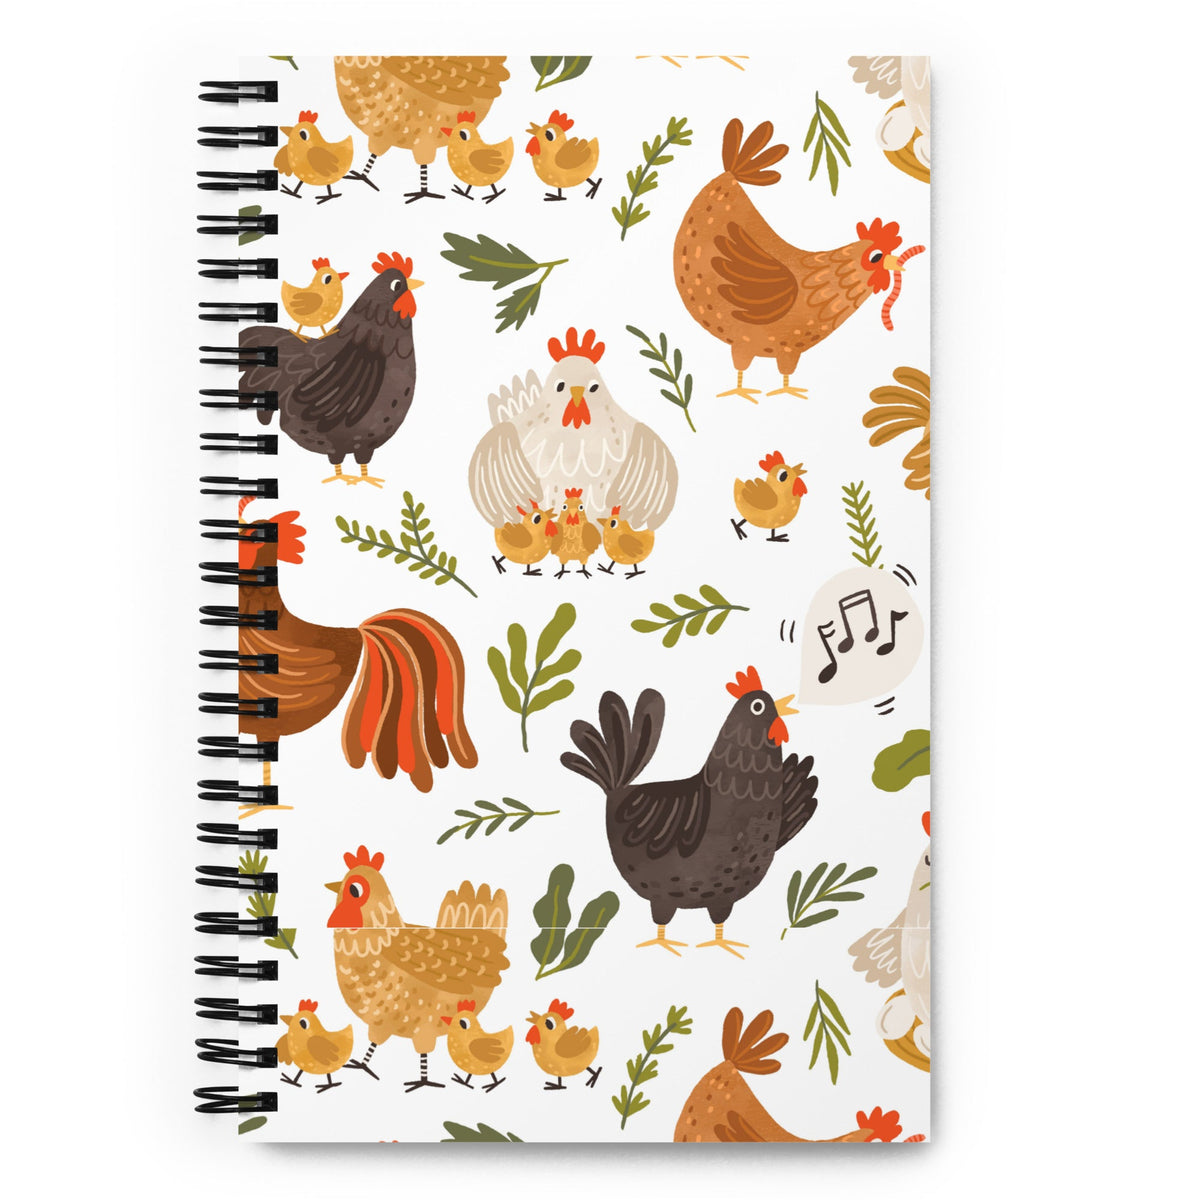 Whimsical Chicken Spiral Notebook - Cluck It All Farms